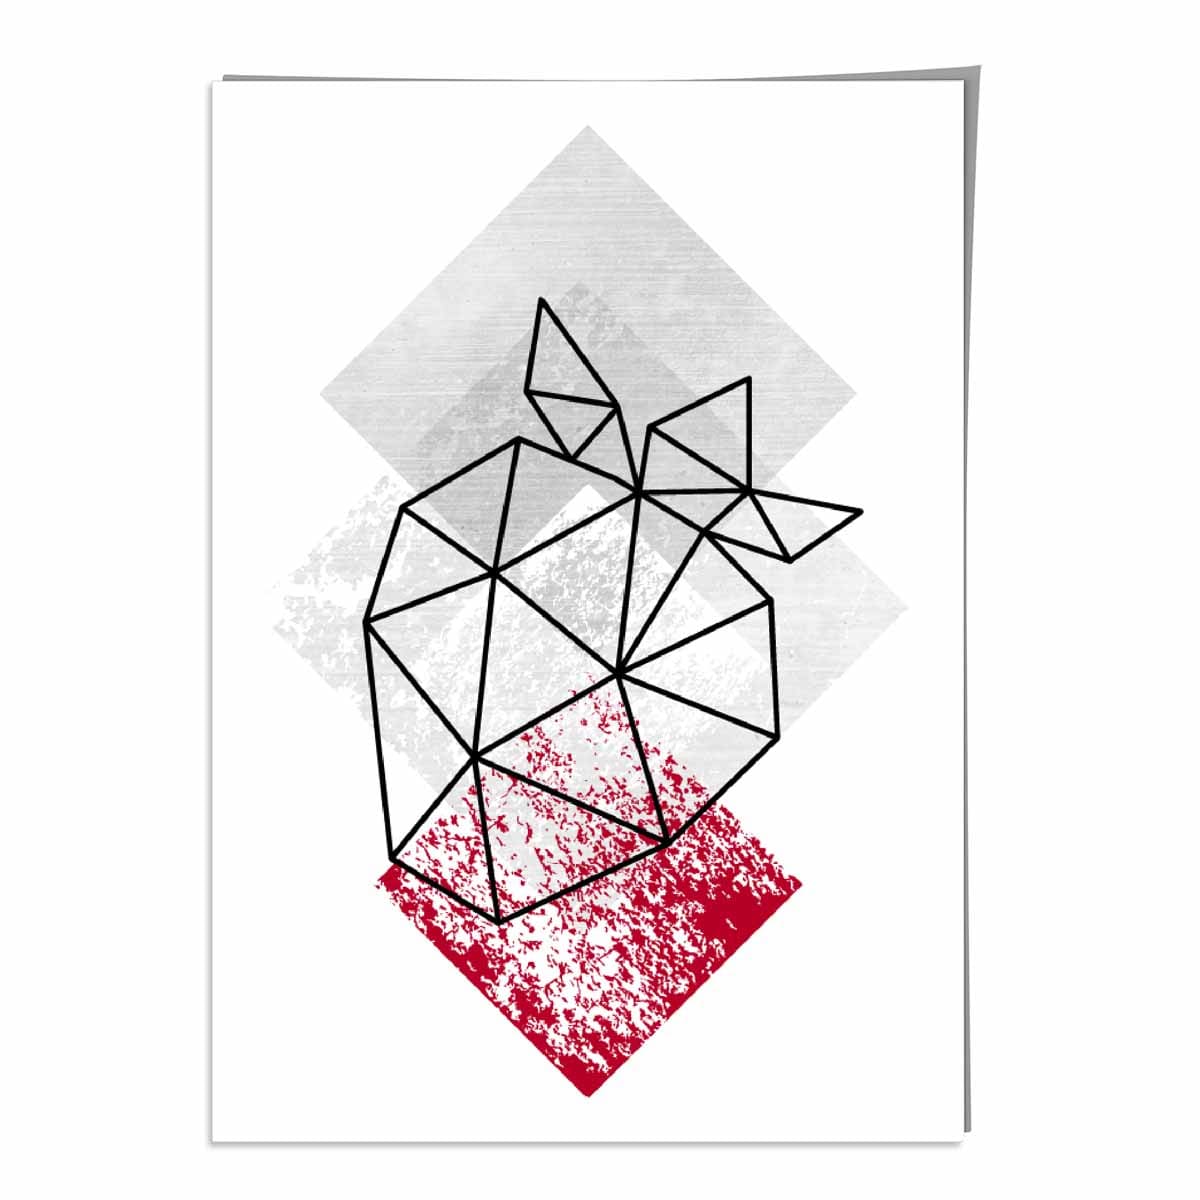 Geometric Fruit Line art Poster of Strawberry in Red & Grey